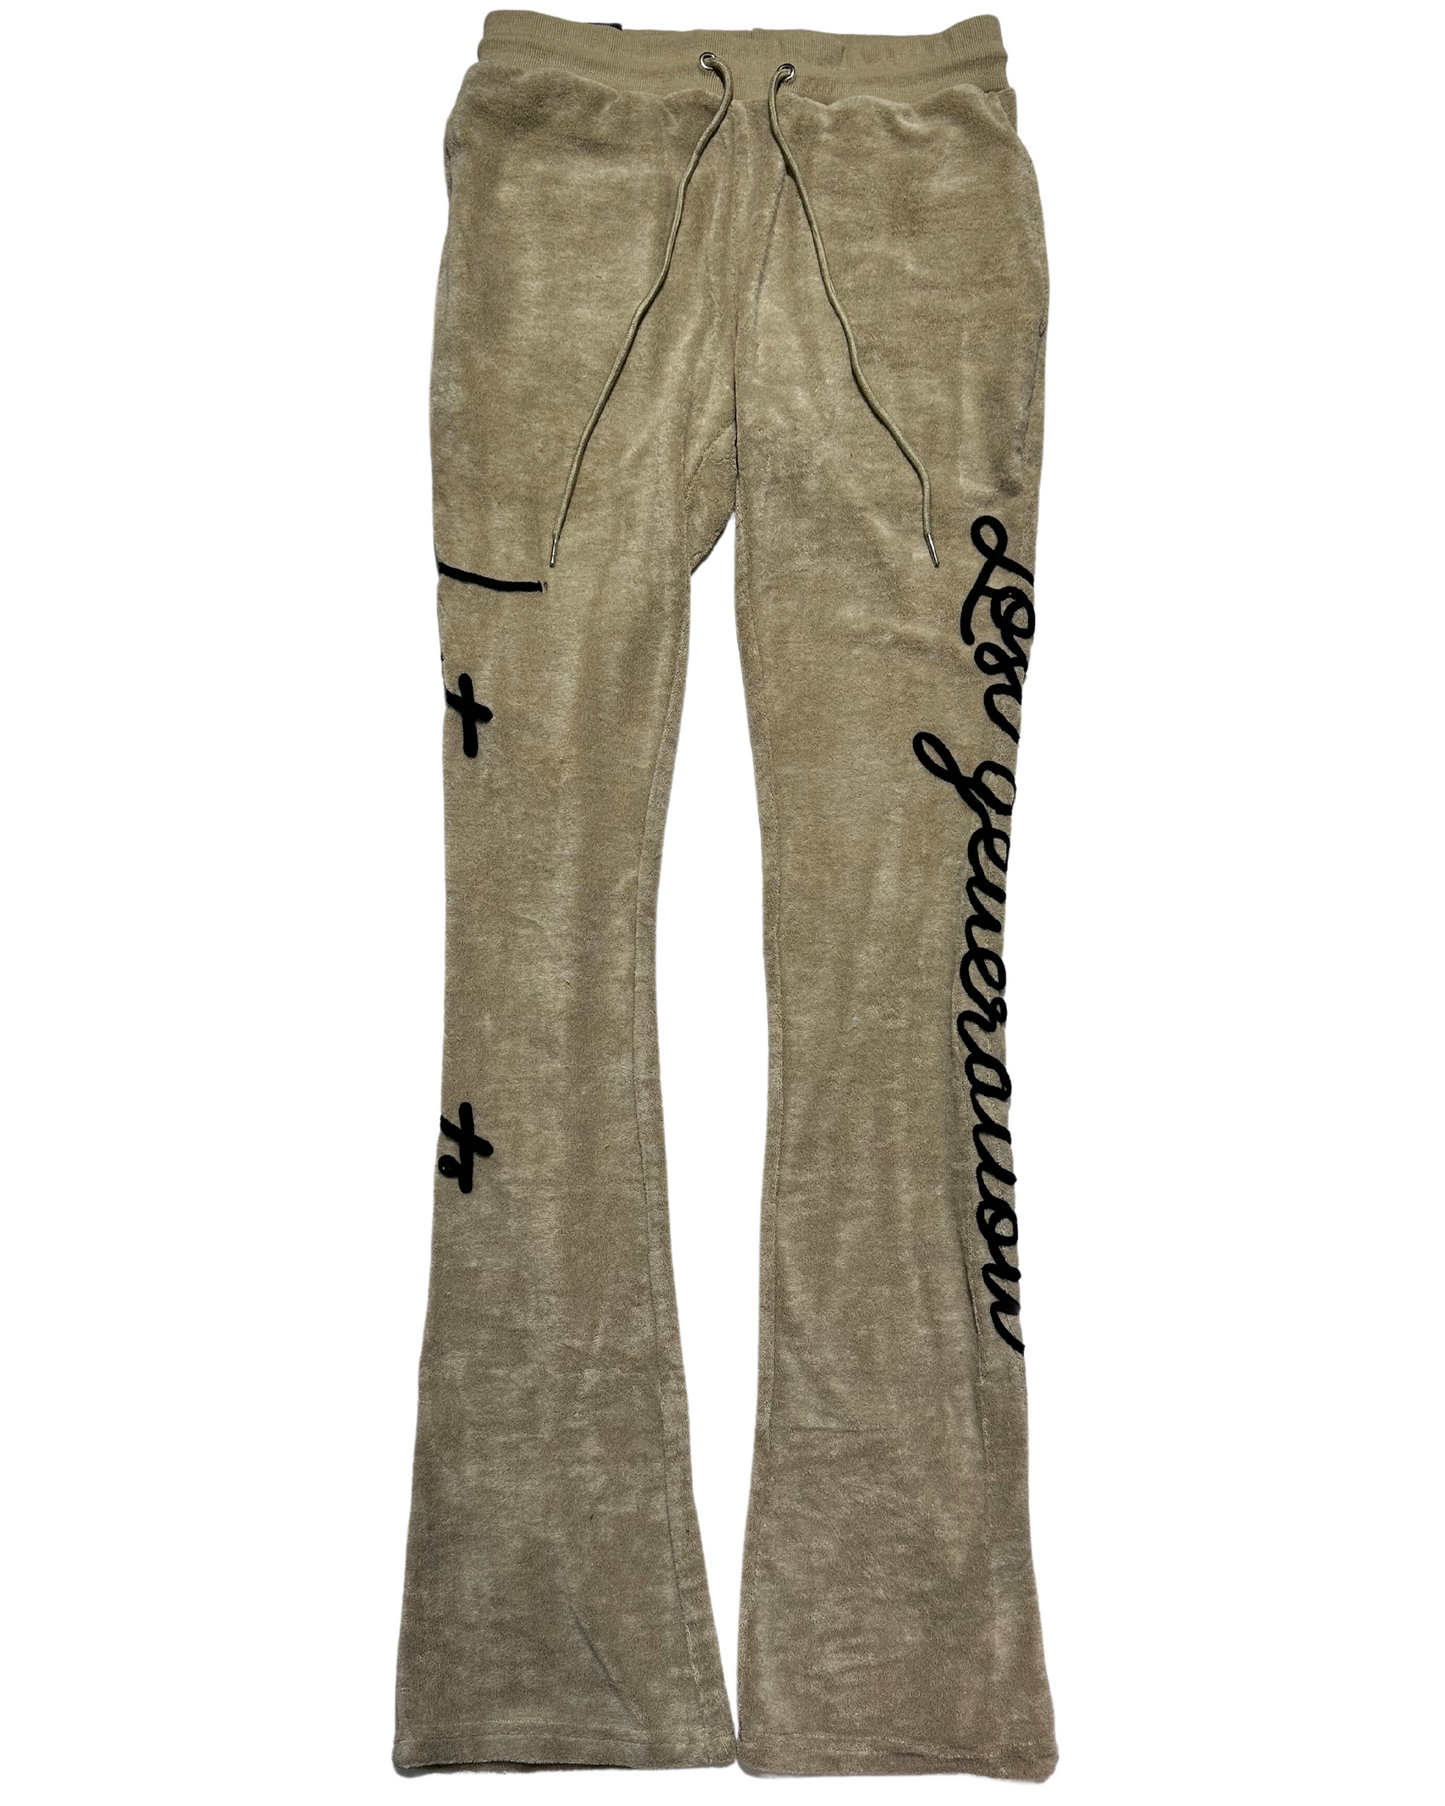 Lost Generation Stacked Sweatpants 5910